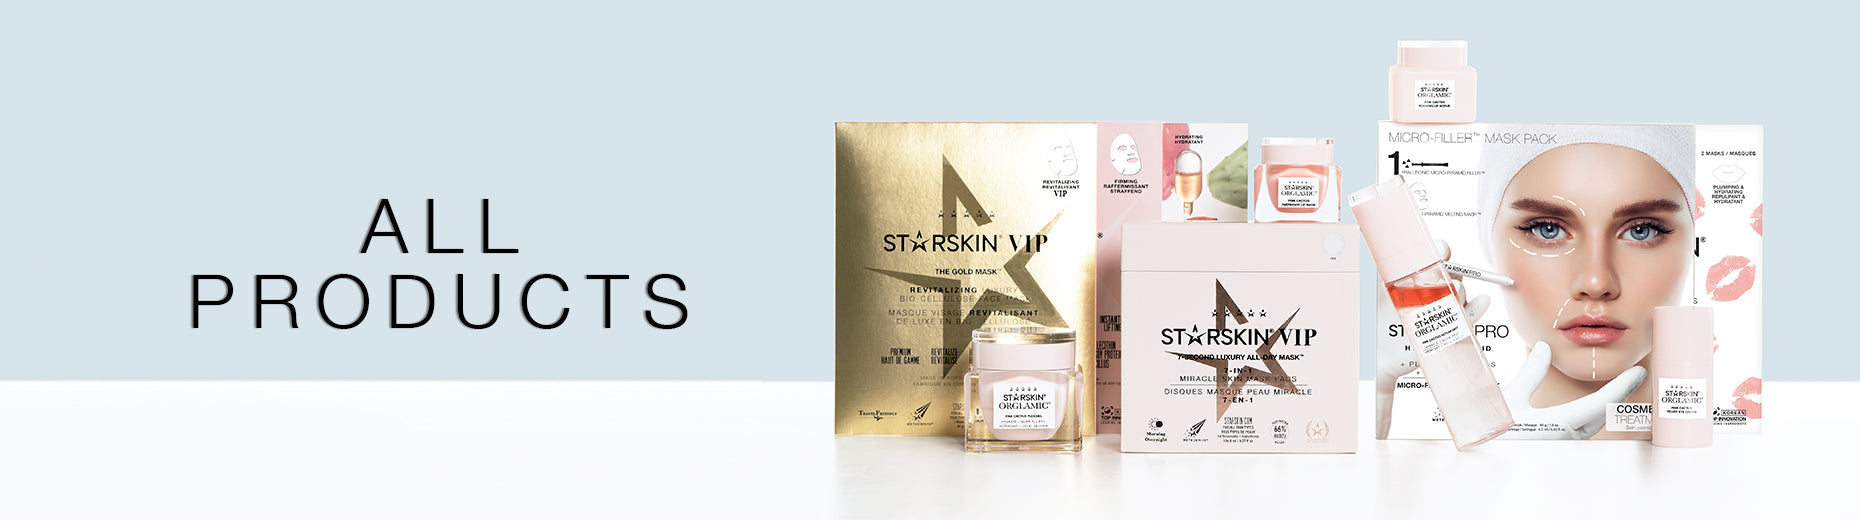 banner with the text: all products and an image of various starskin products 